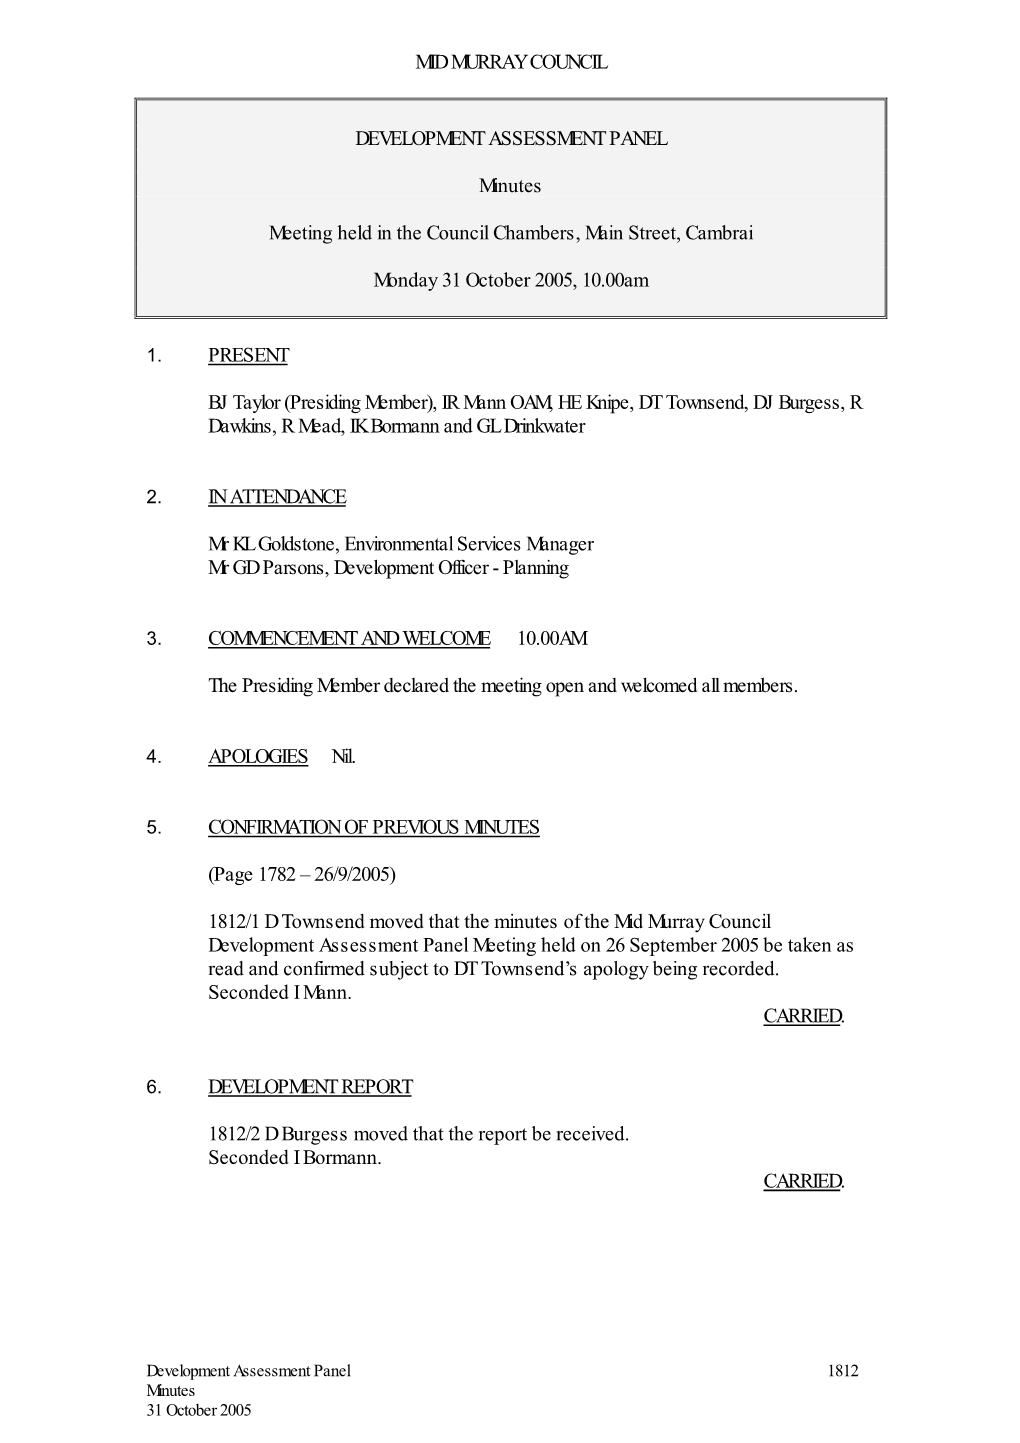 Mid Murray Council Development Assessment Panel Meeting Held on 26 September 2005 Be Taken As Read and Confirmed Subject to DT Townsend’S Apology Being Recorded